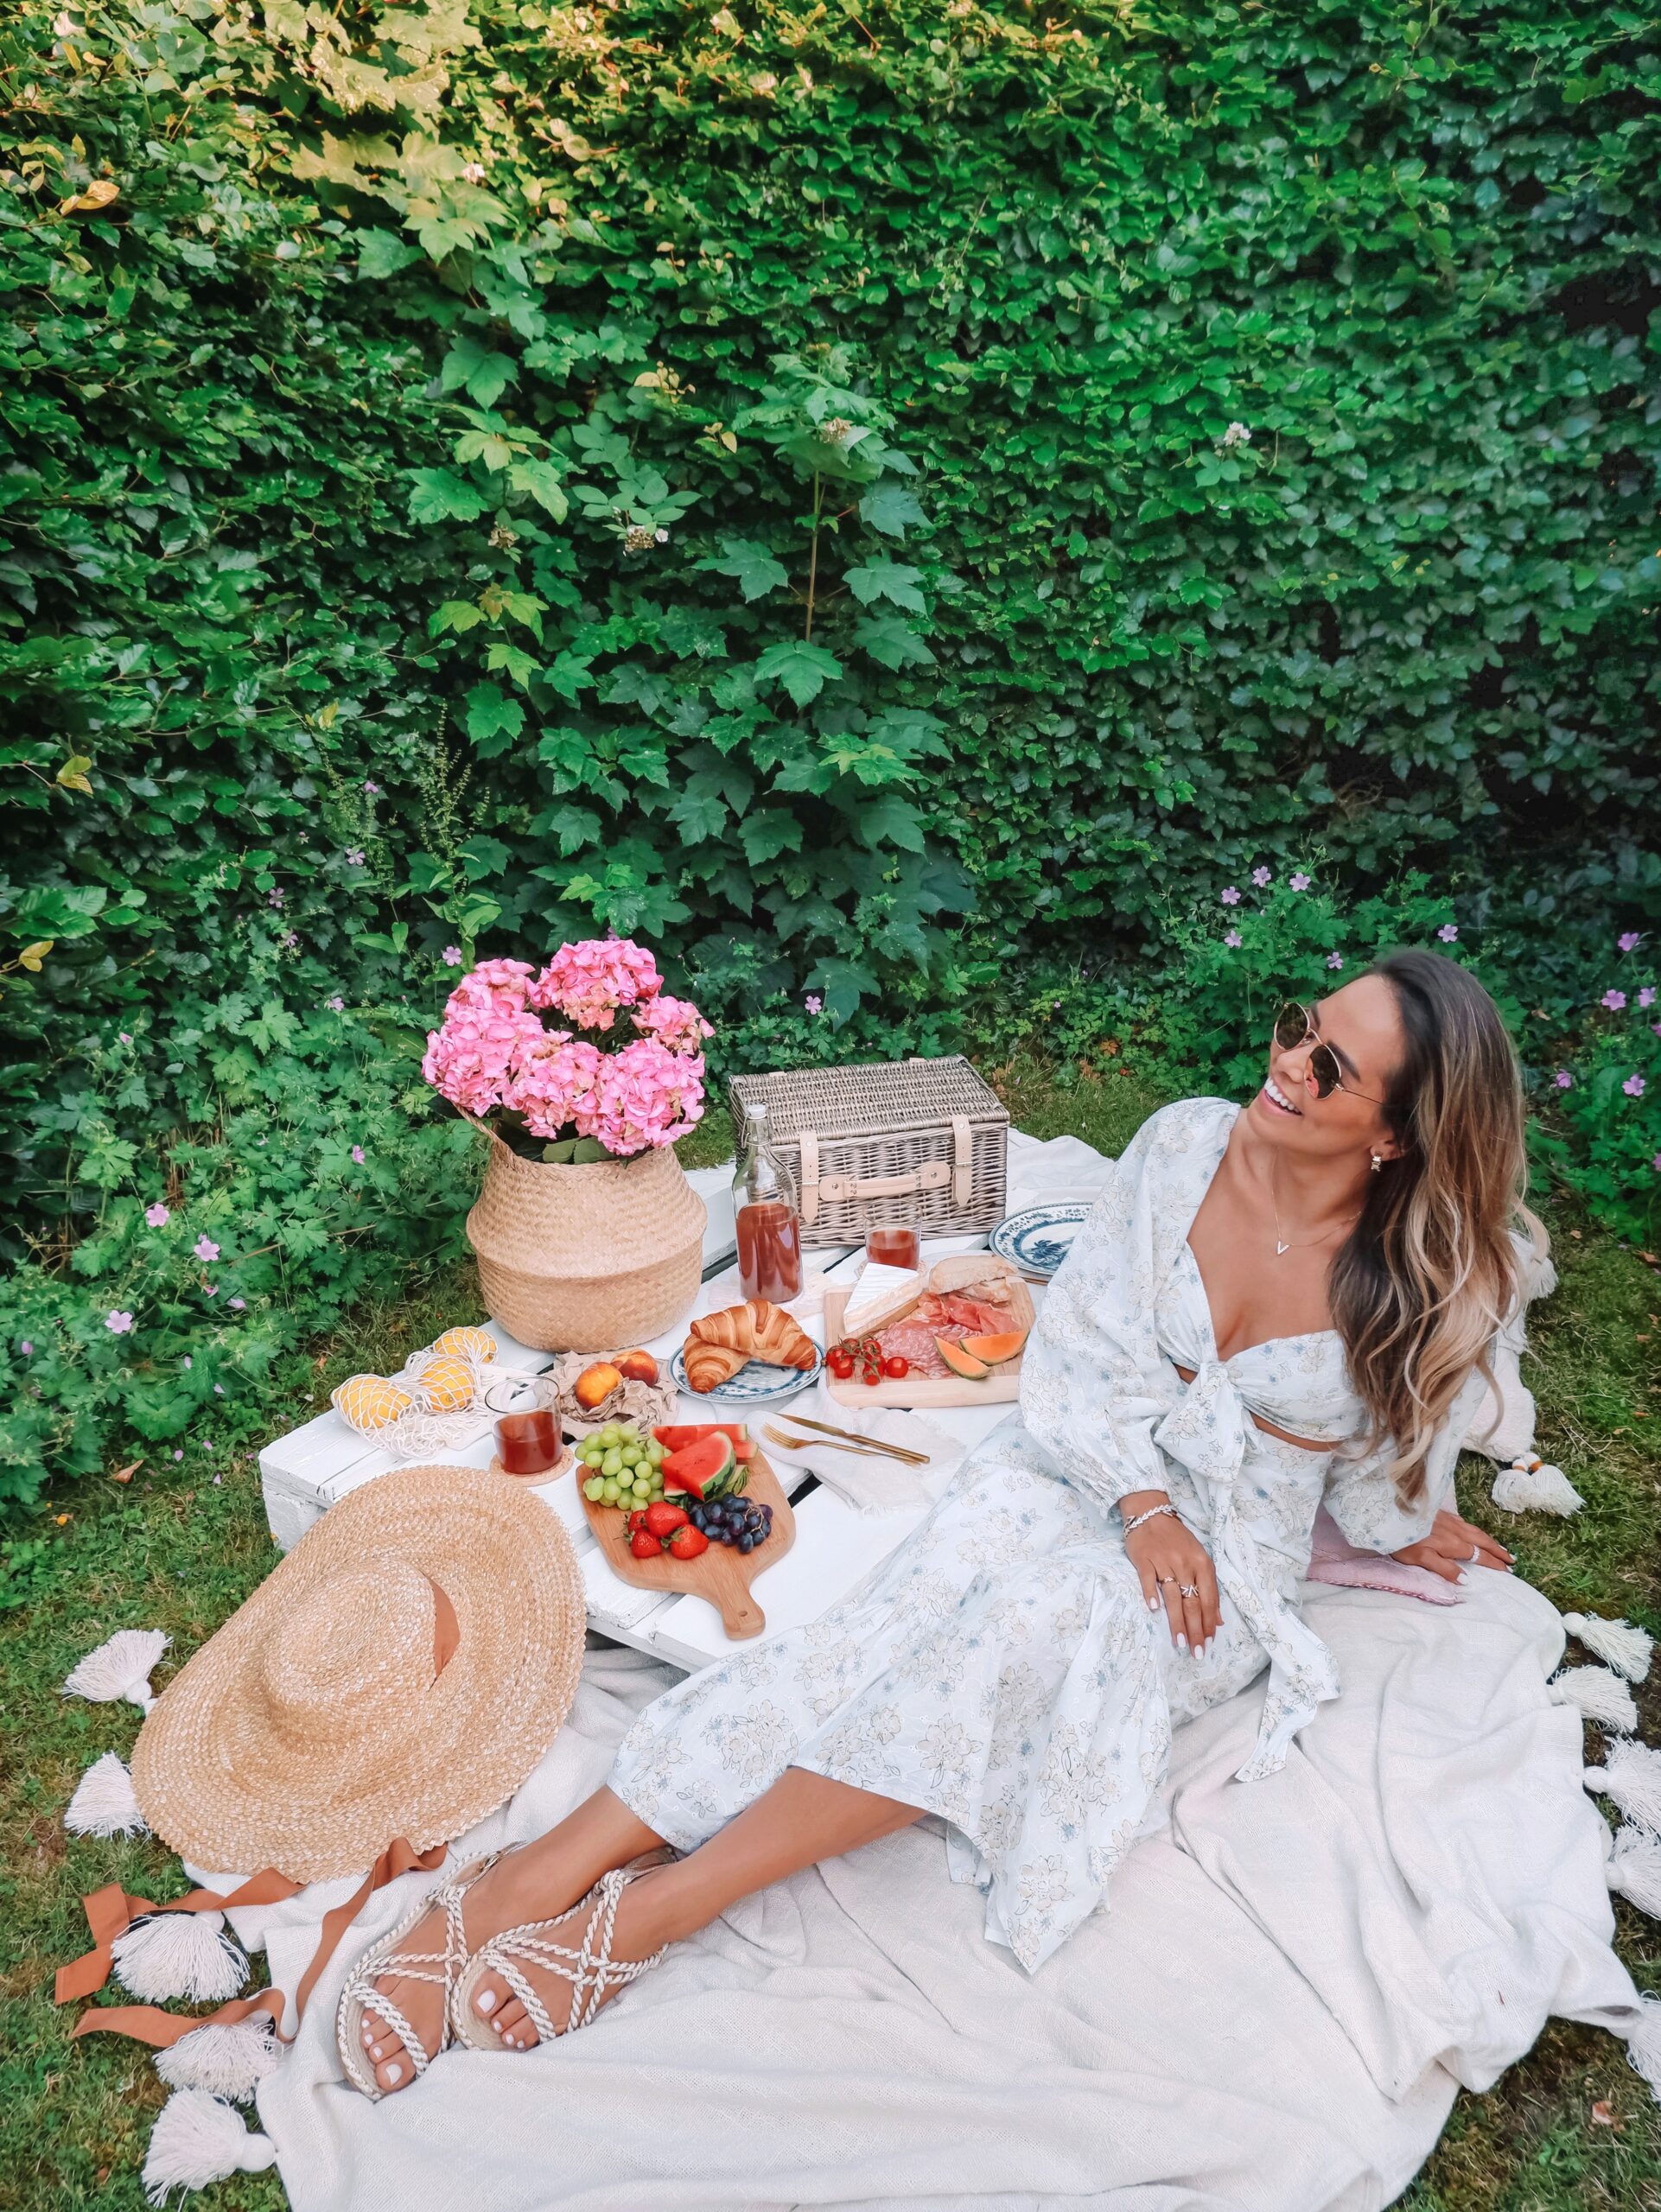 Personal Stylist Shares Picnic Outfit Ideas You Can Easily Recreate